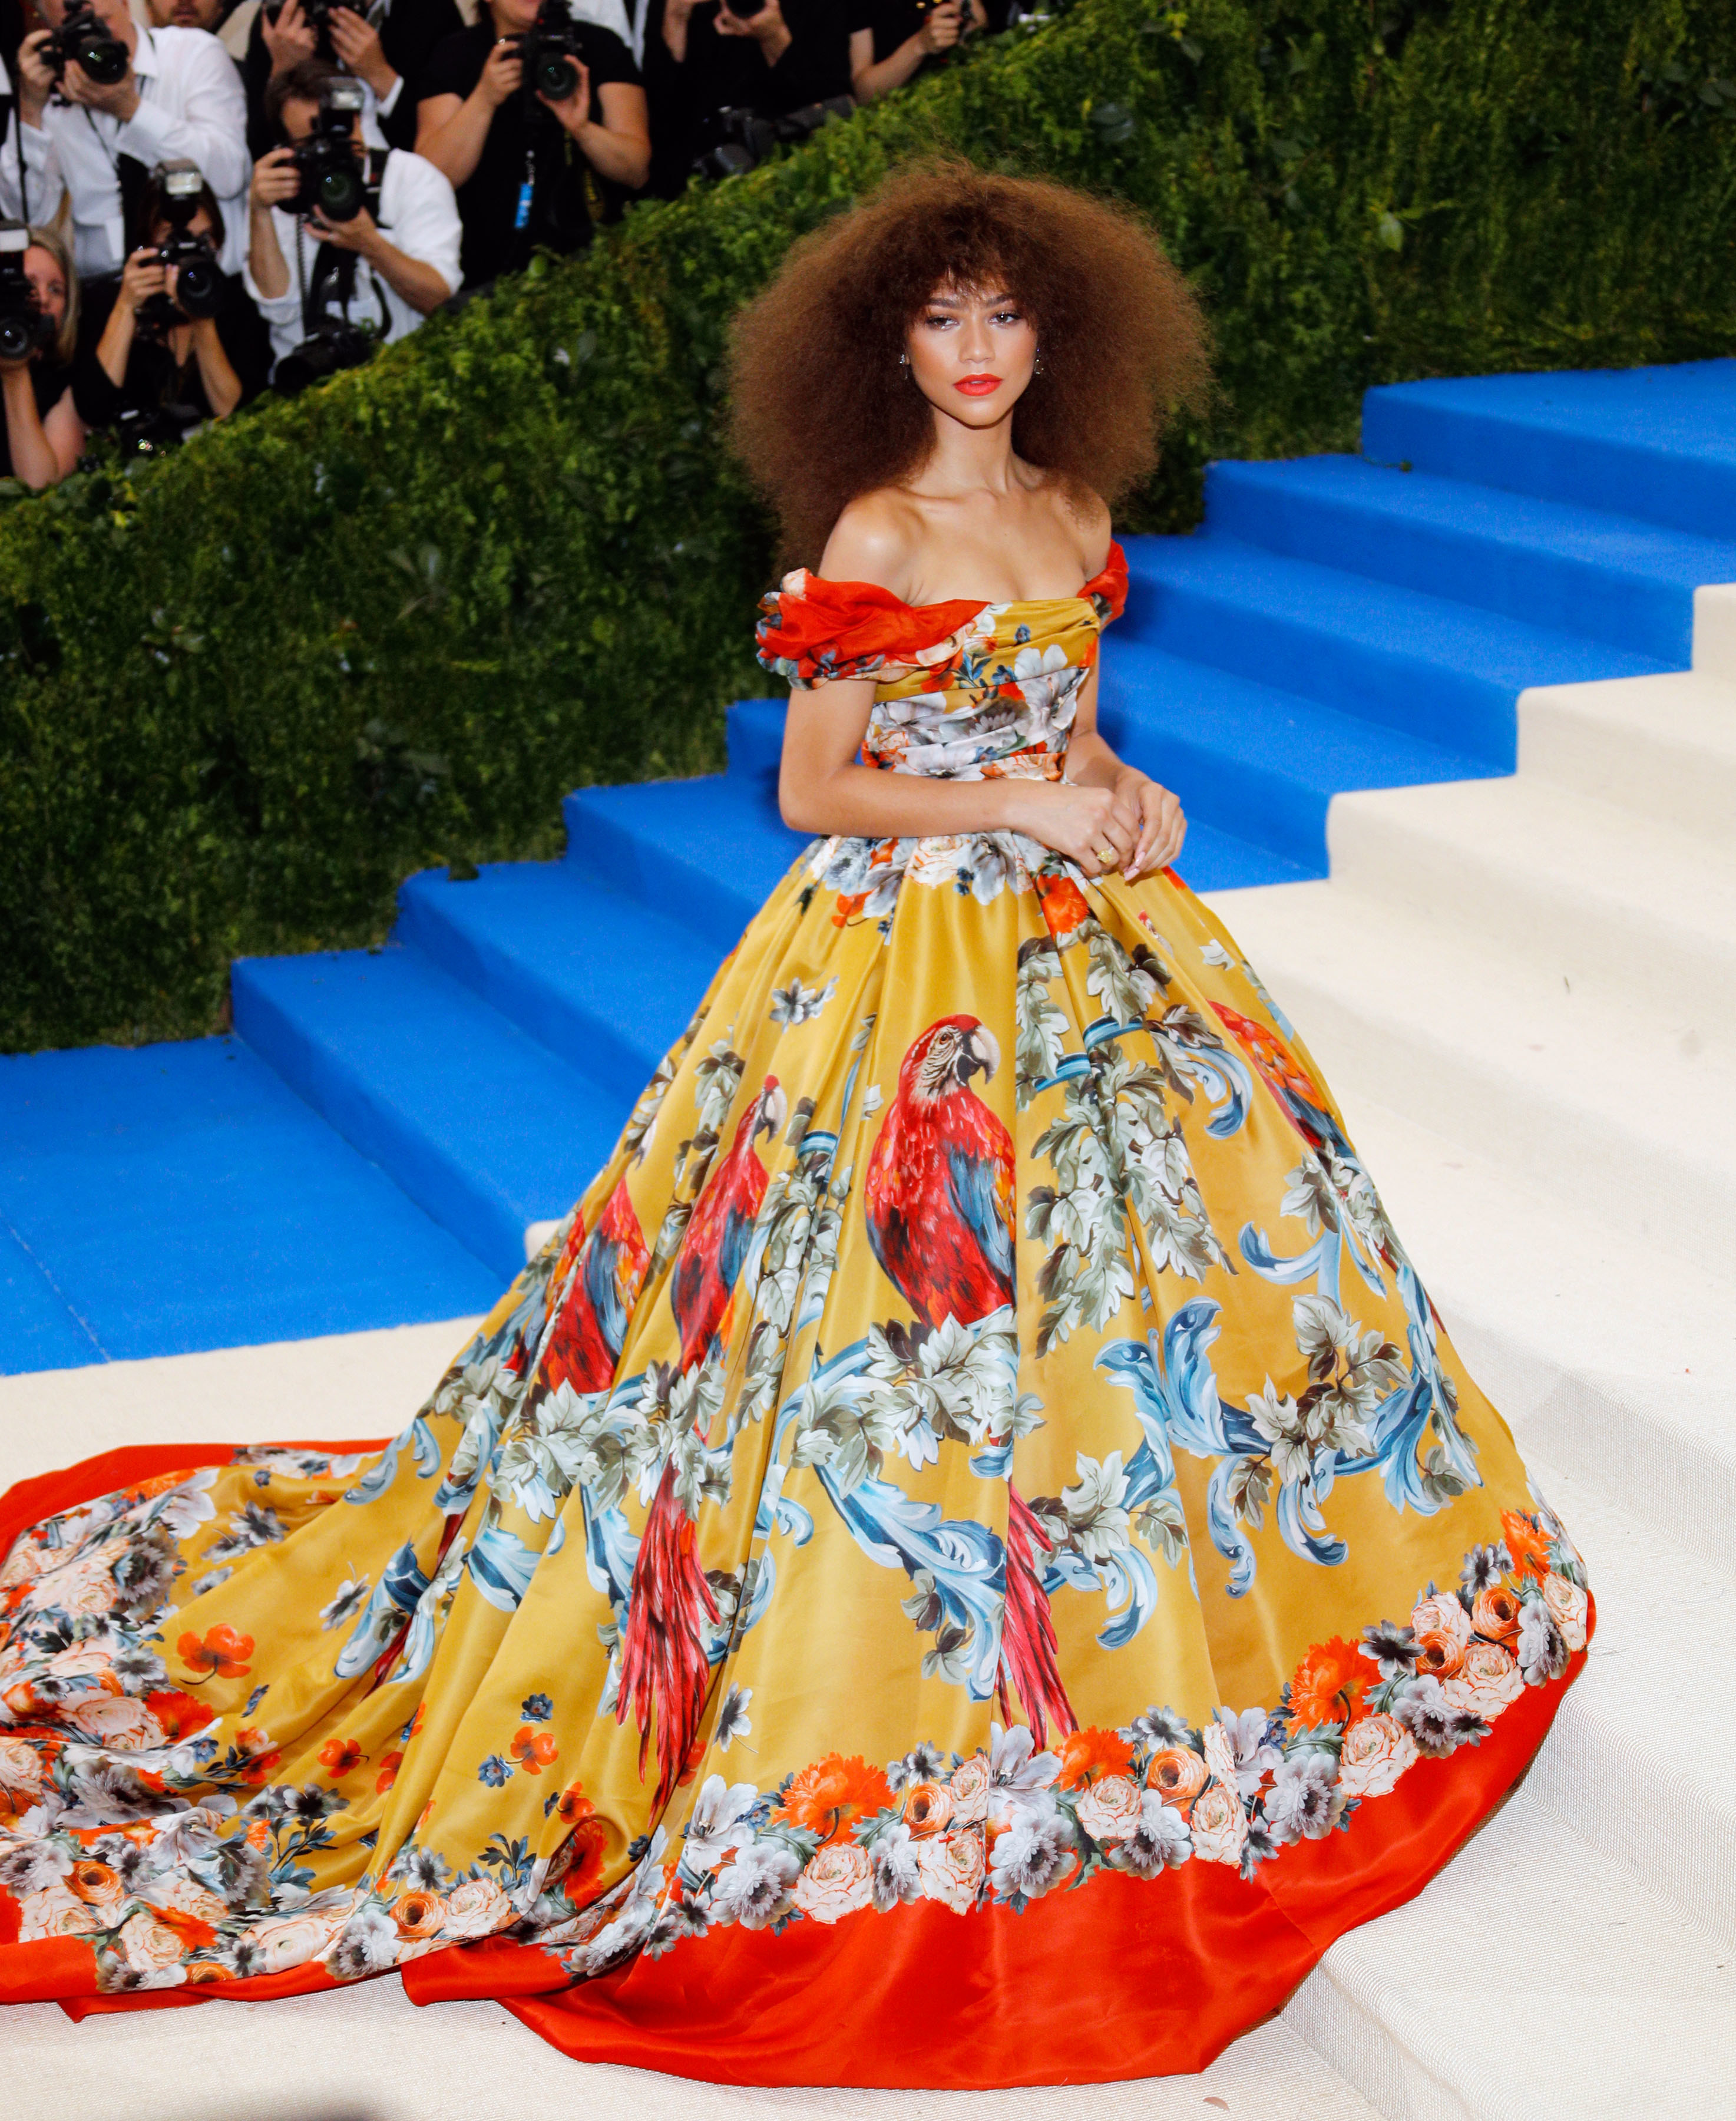 Zendaya wore an off-the-shoulder ballgown printed with parrots and flowers